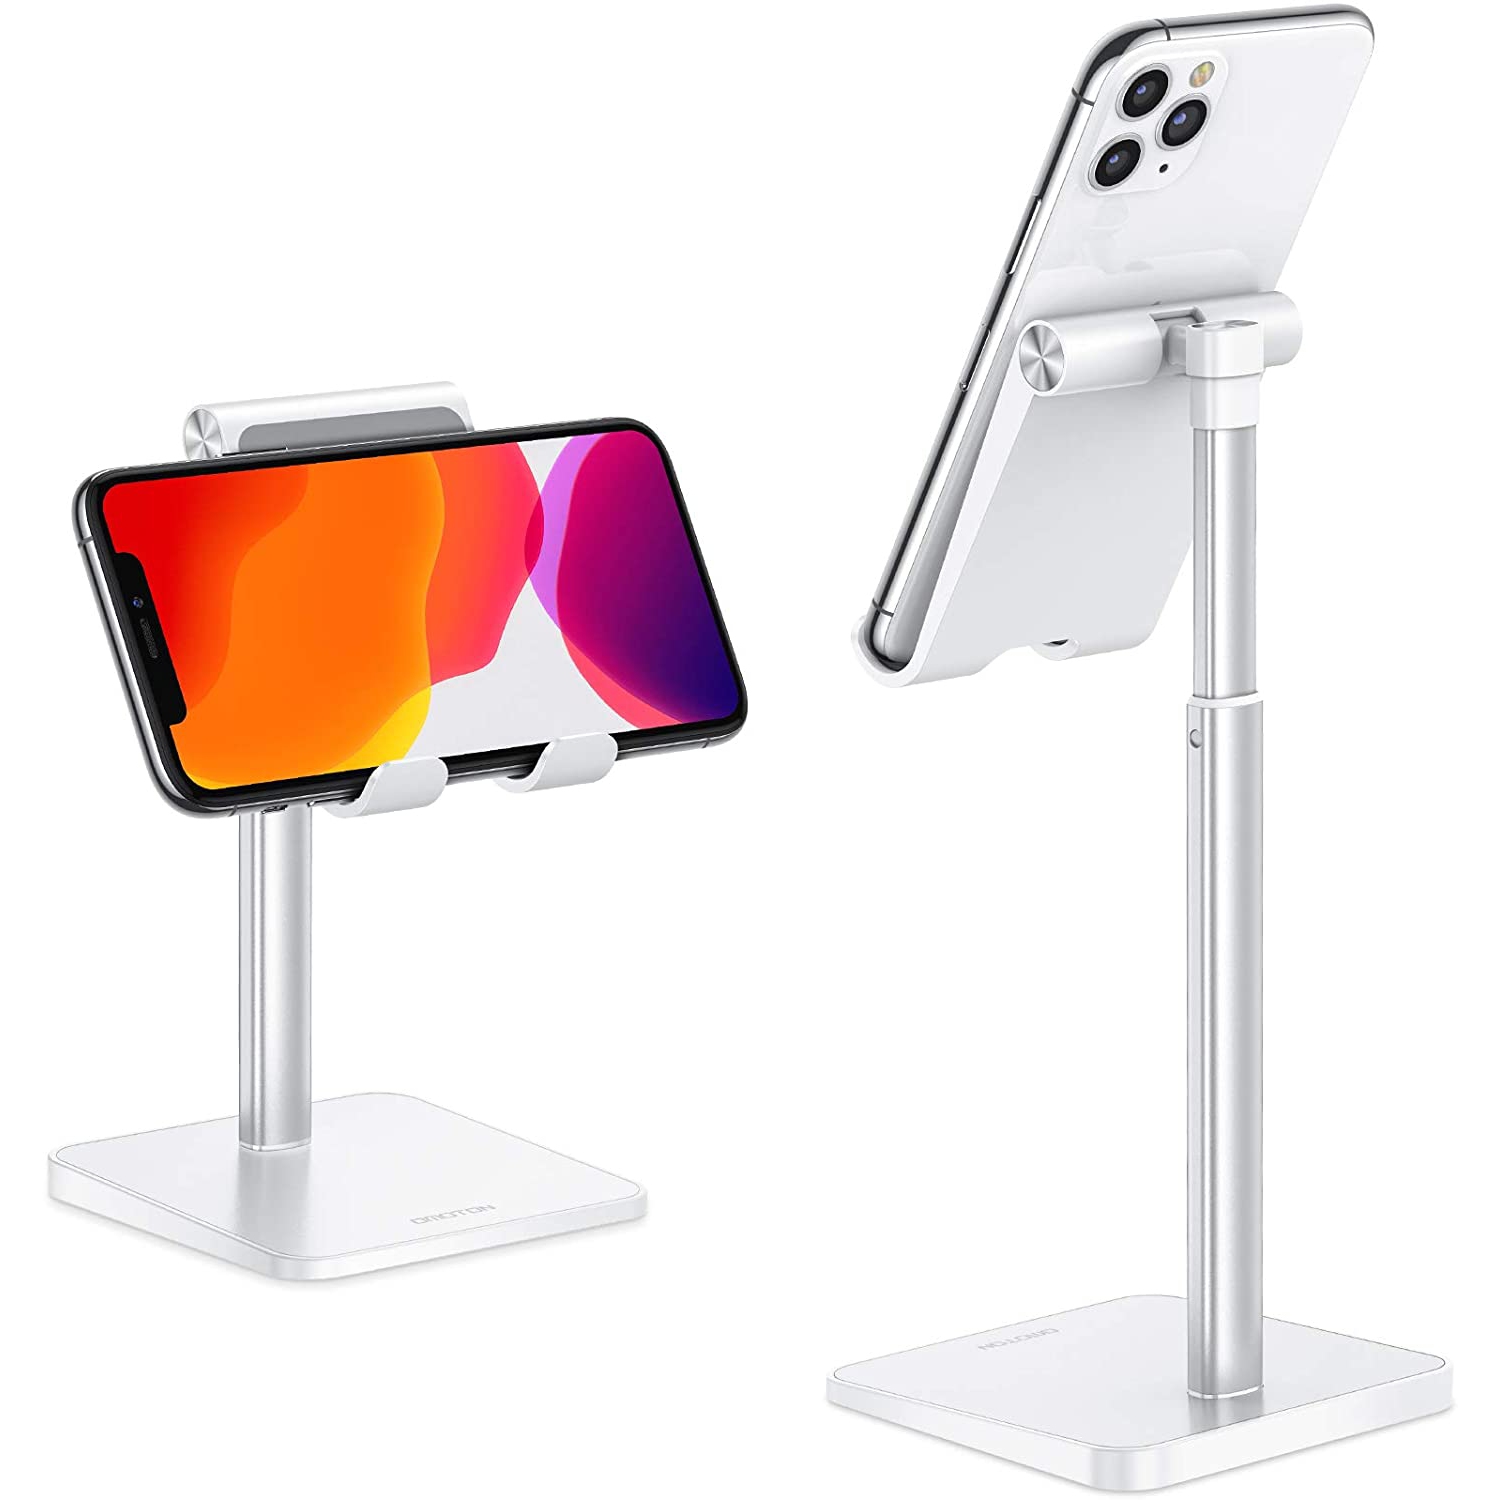 WINGOMART Cell Phone Stand, Adjustable Angle Height Desk Phone Dock Holder for iPhone SE 2/11 / 11 Pro/XS Max/XR, Samsung Galaxy Note 20/ S20/ S10/ S9 and Other Phones (3.5-7.0-Inch), Silver